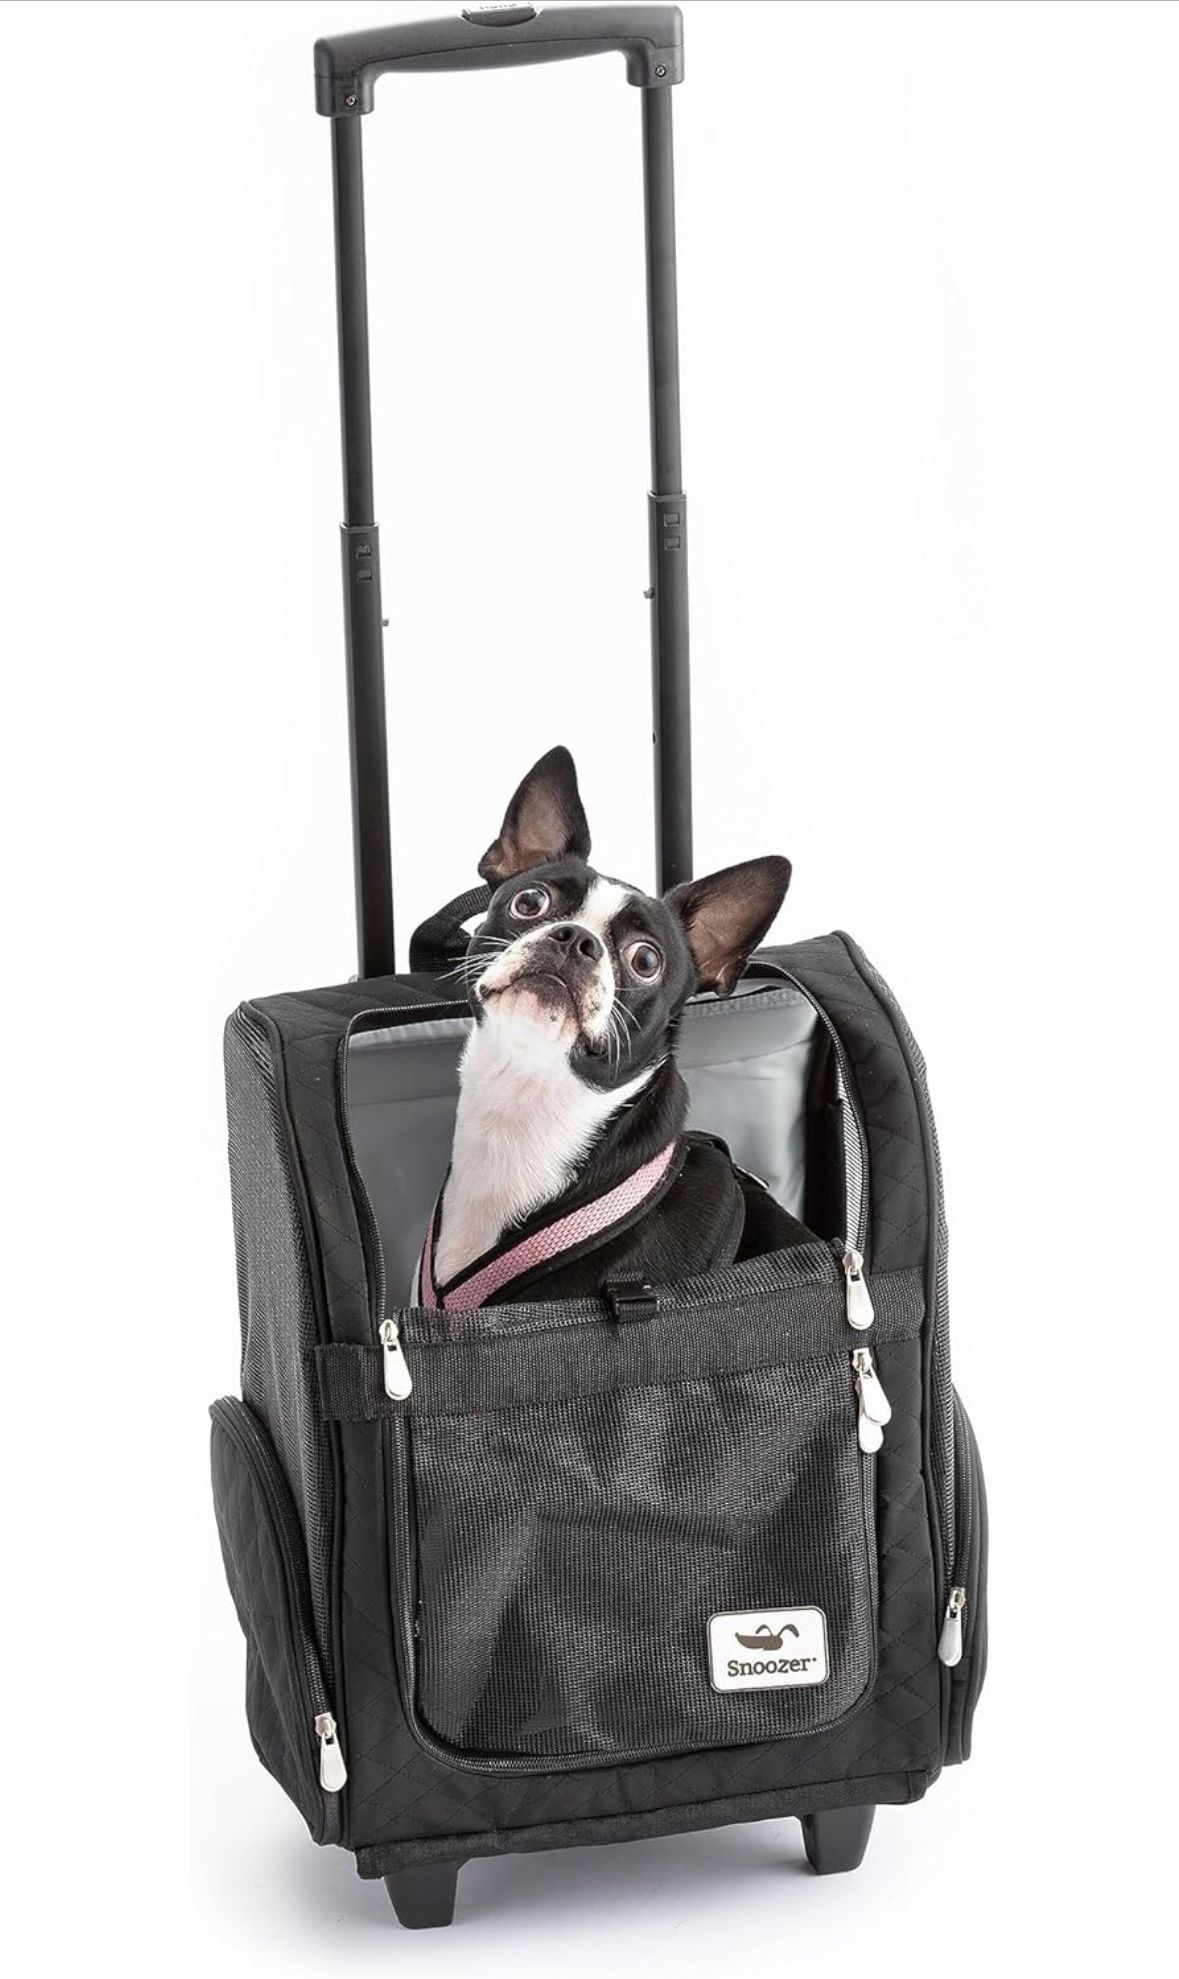 MINT CONDITION Snoozer Roll Around 4-in-1 Pet Carrier, Black, Large DOG CAT BAG